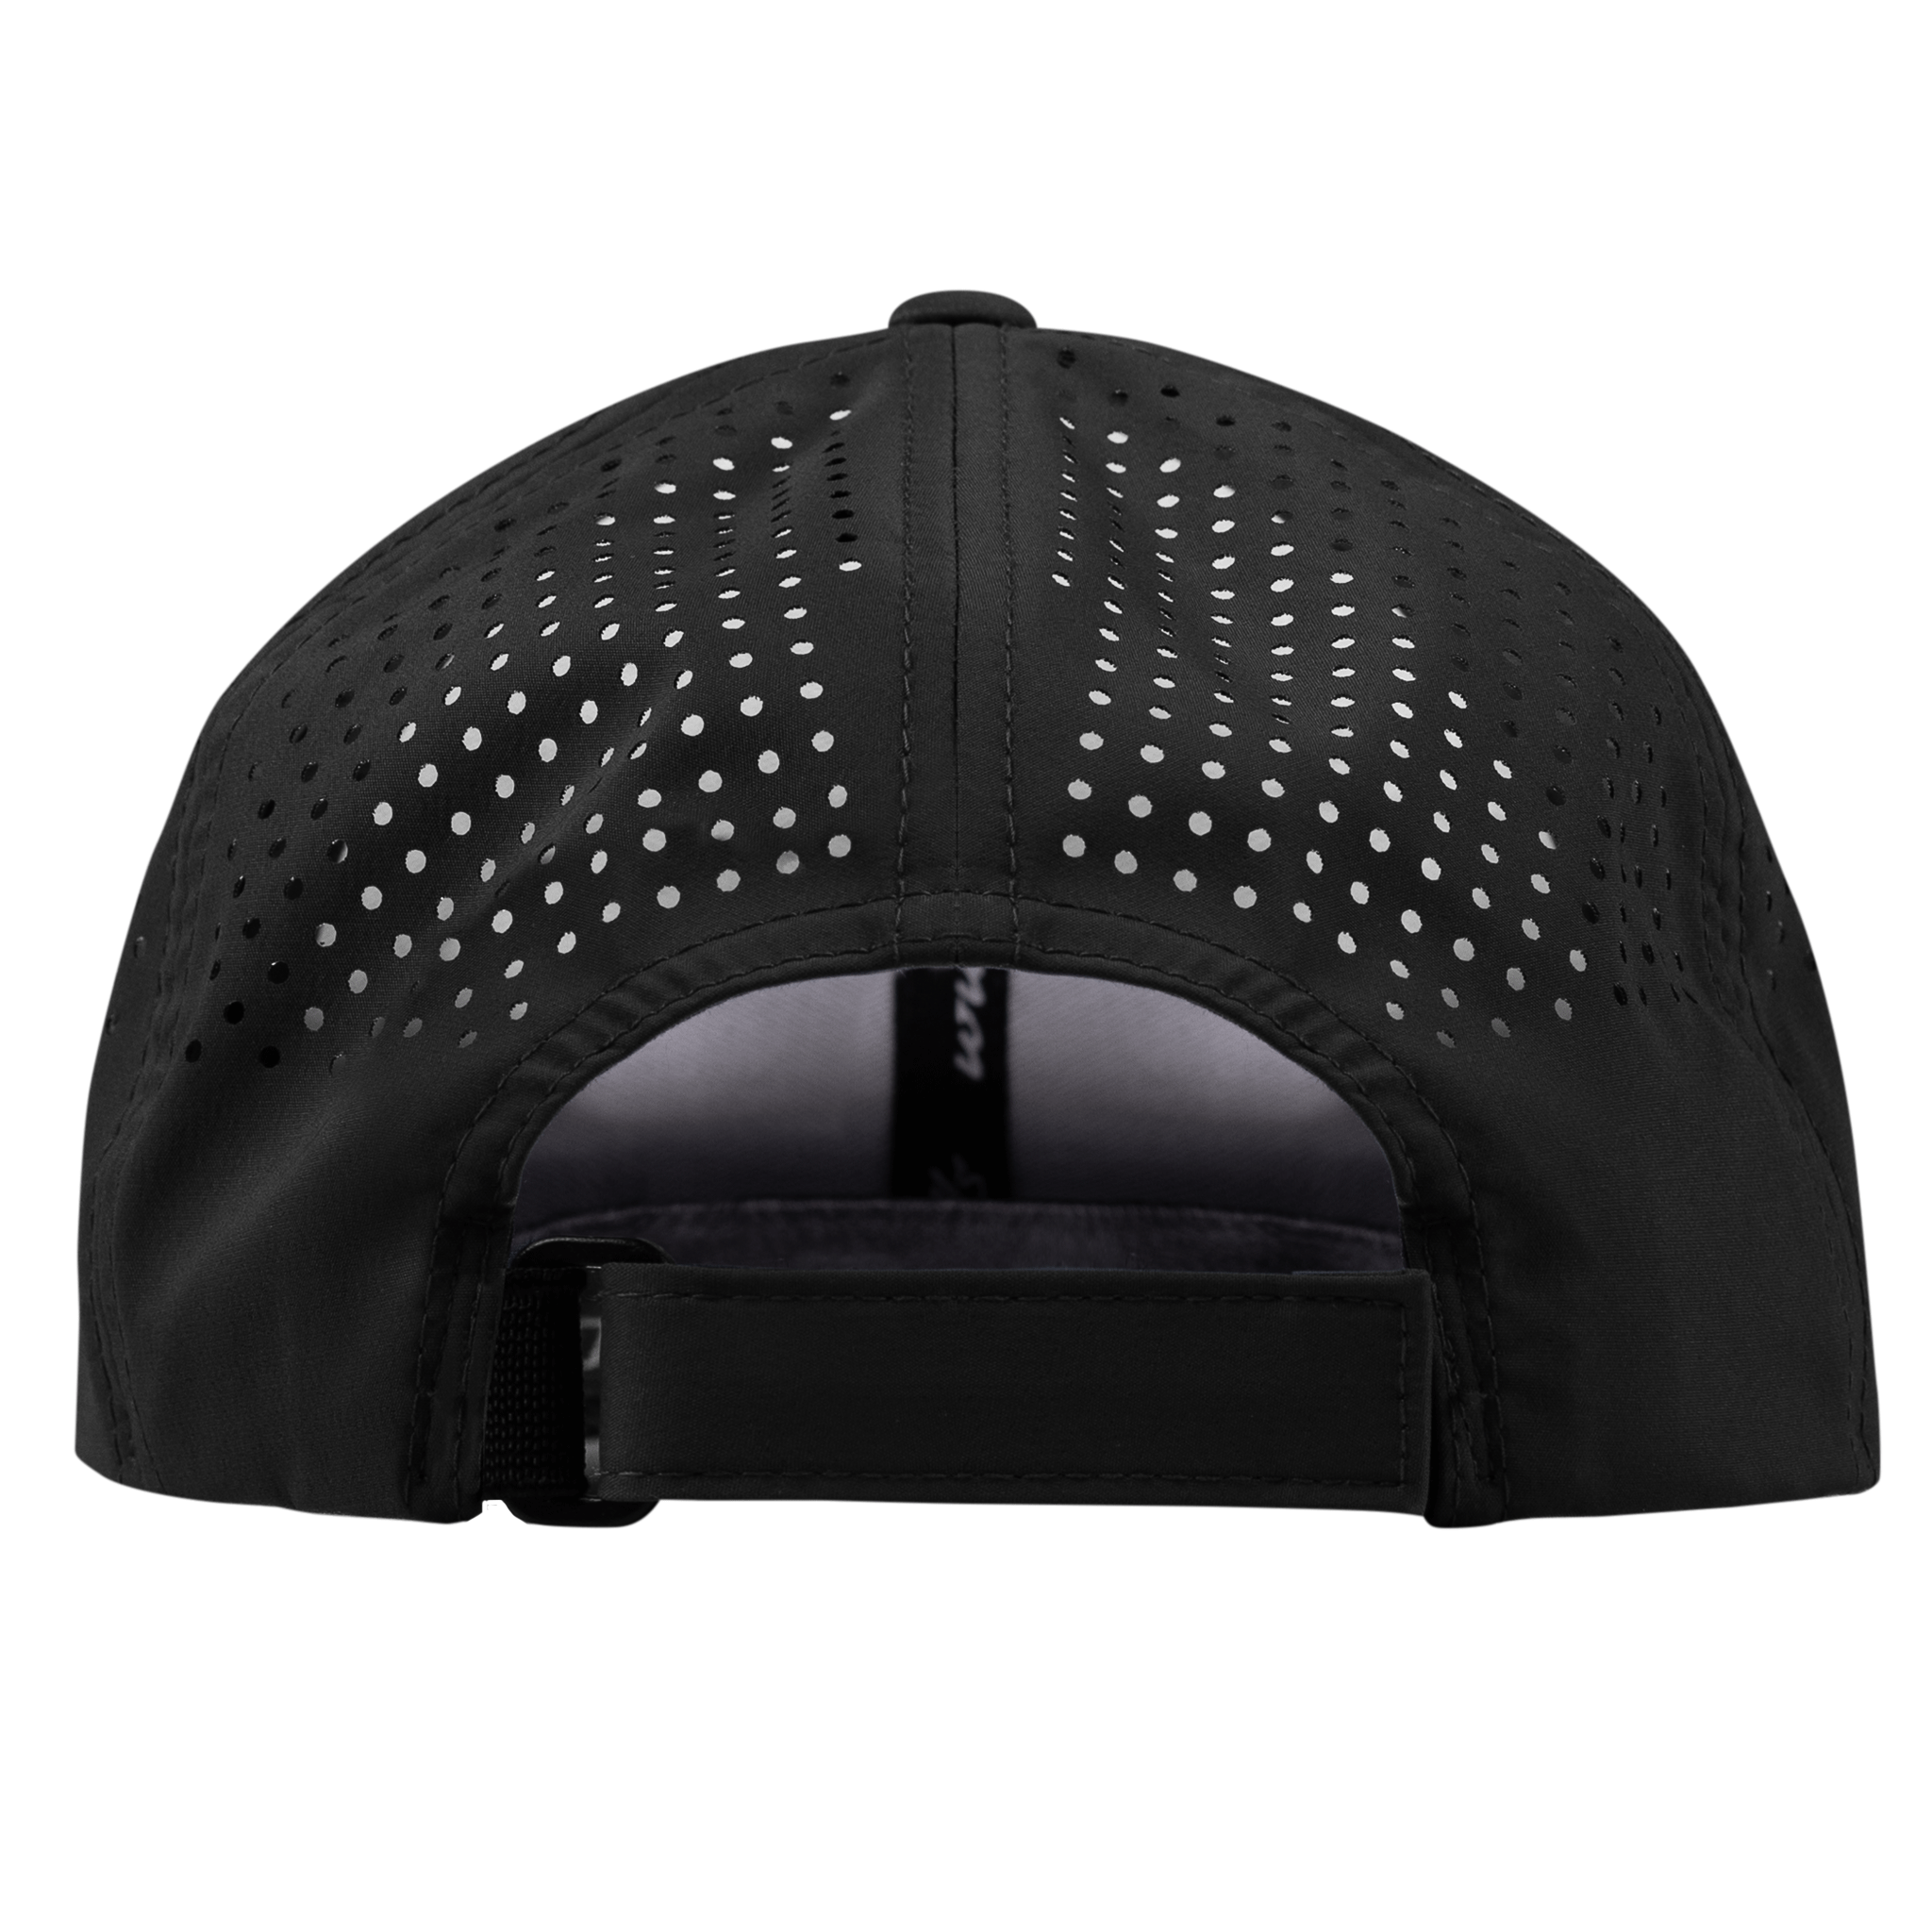 Old Glory Stealth Curved Performance Back Black